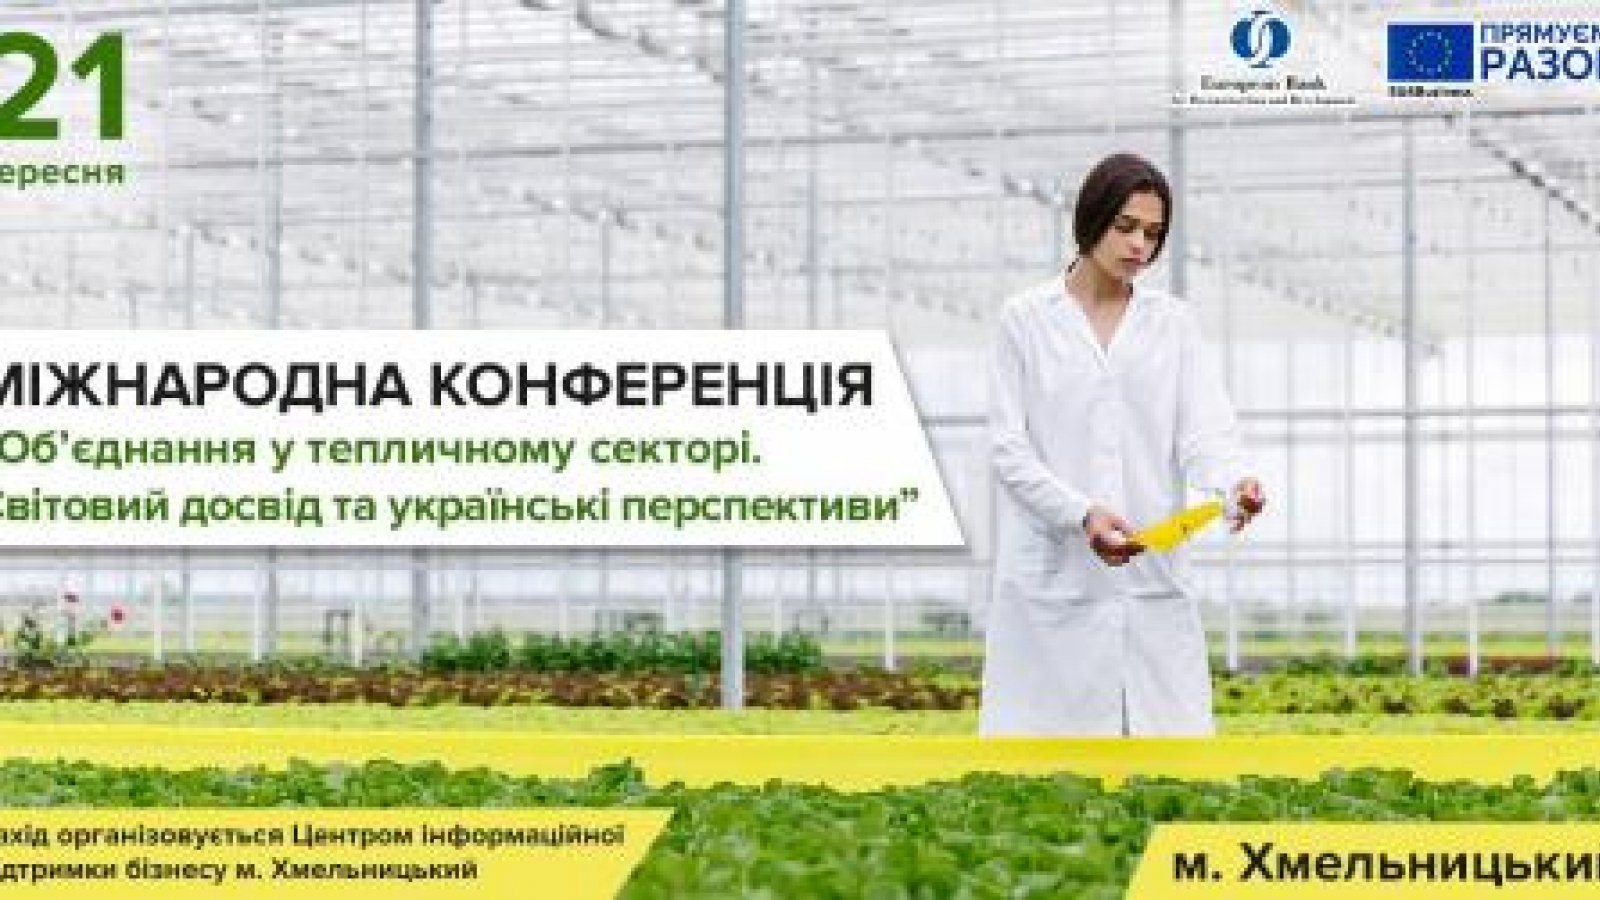 Ukraine to host international conference on greenhouse industry